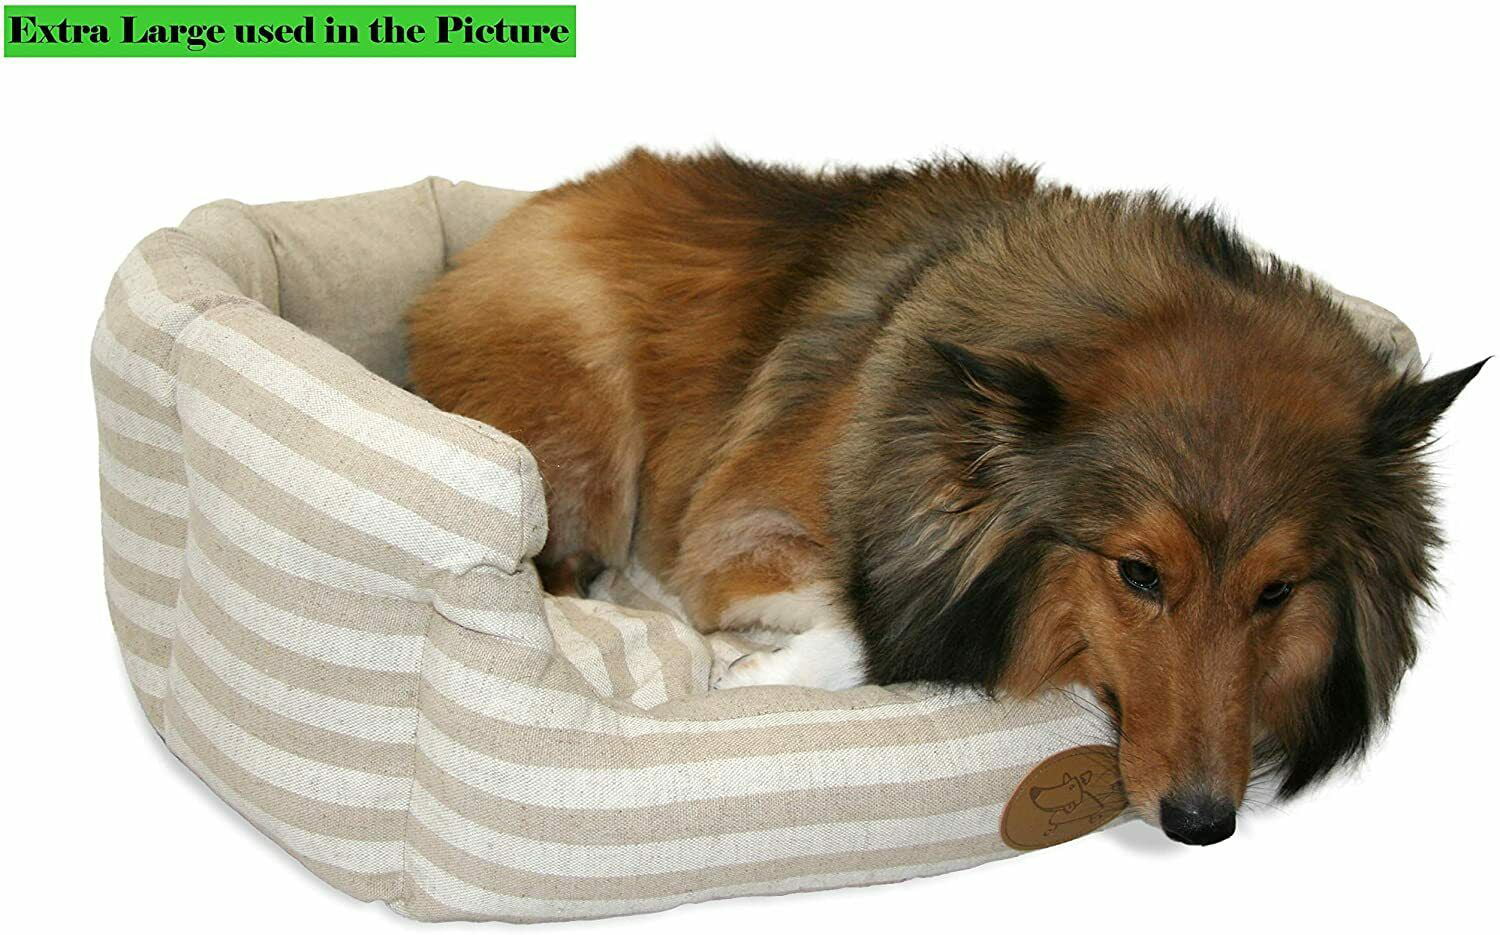 PETSGO Cushion Calming Donut Dog&Cat Bed Ultra Soft Self-Warming Machine Washable Pet Bed in Multiple Sizes 